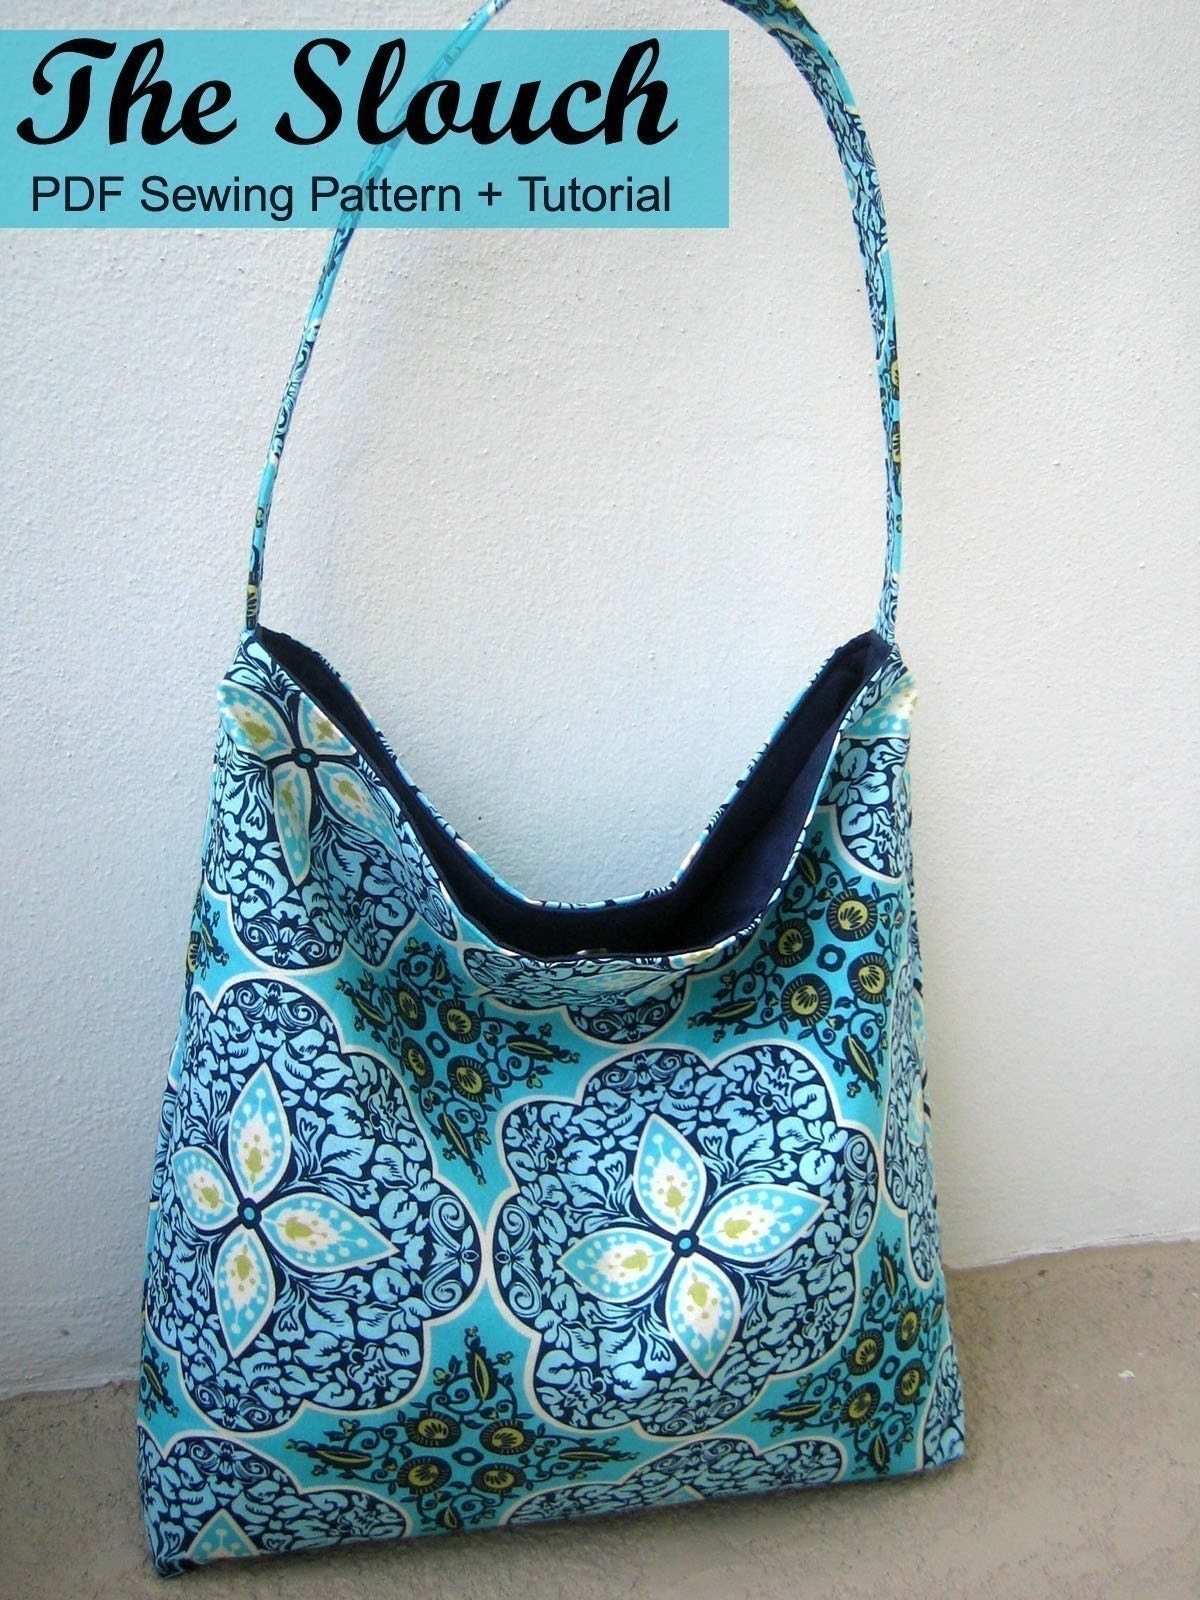 The Slouch Hobo Bag PDF Sewing Pattern by rileyproject on Etsy